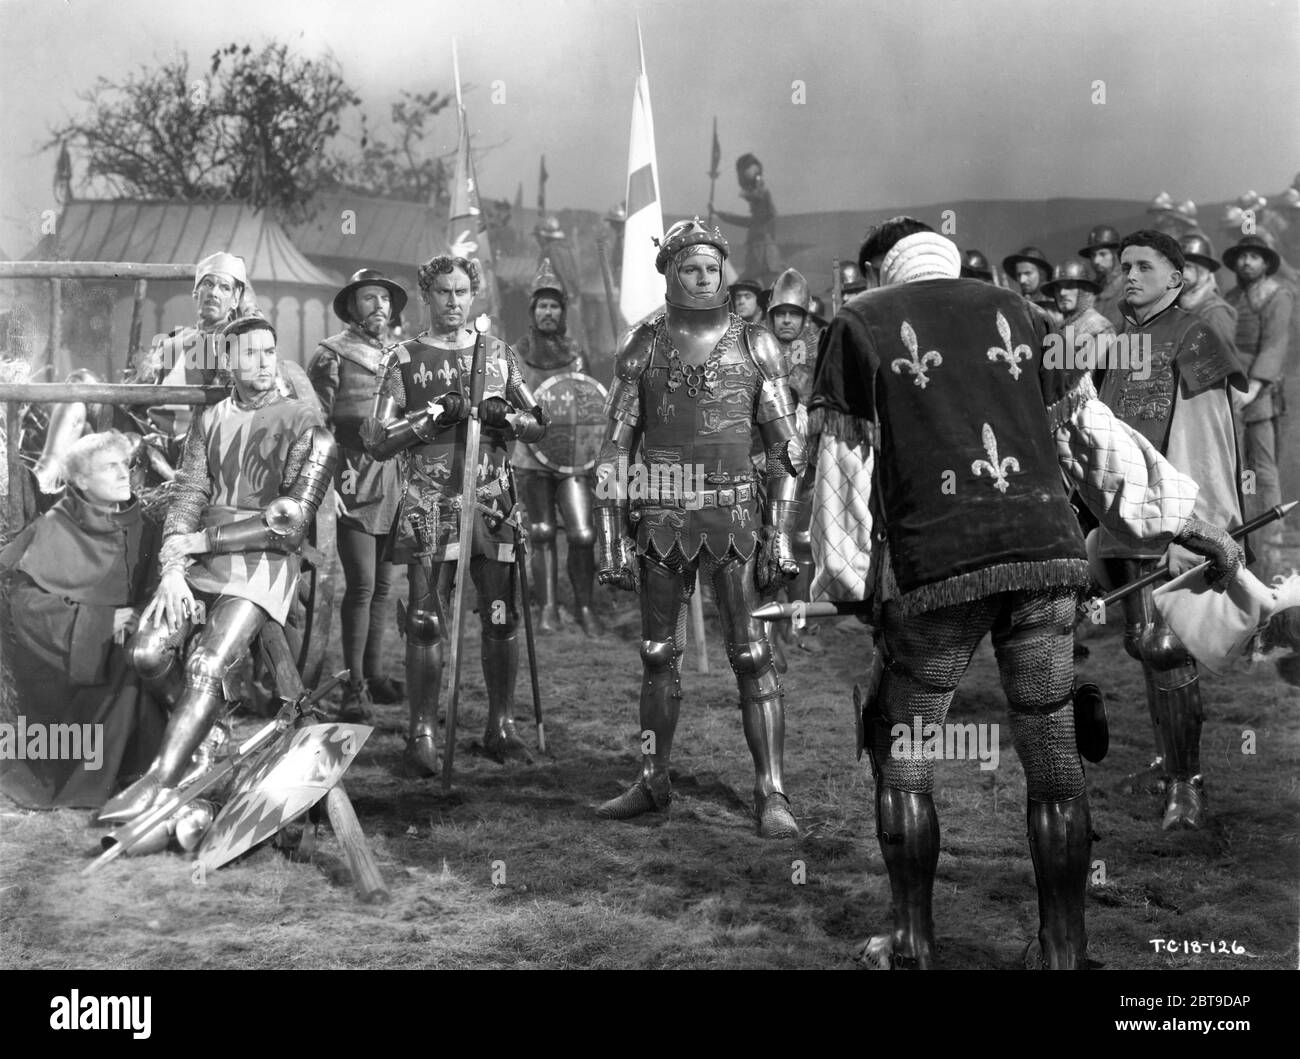 GRIFFITH JONES NICHOLAS HANNAN LAURENCE OLIVIER RALPH TRUMAN and VERNON GREEVES in HENRY V 1944 director LAURENCE OLIVIER play William Shakespeare music William Walton Two Cities Films / Eagle - Lion Distributors Ltd Stock Photo